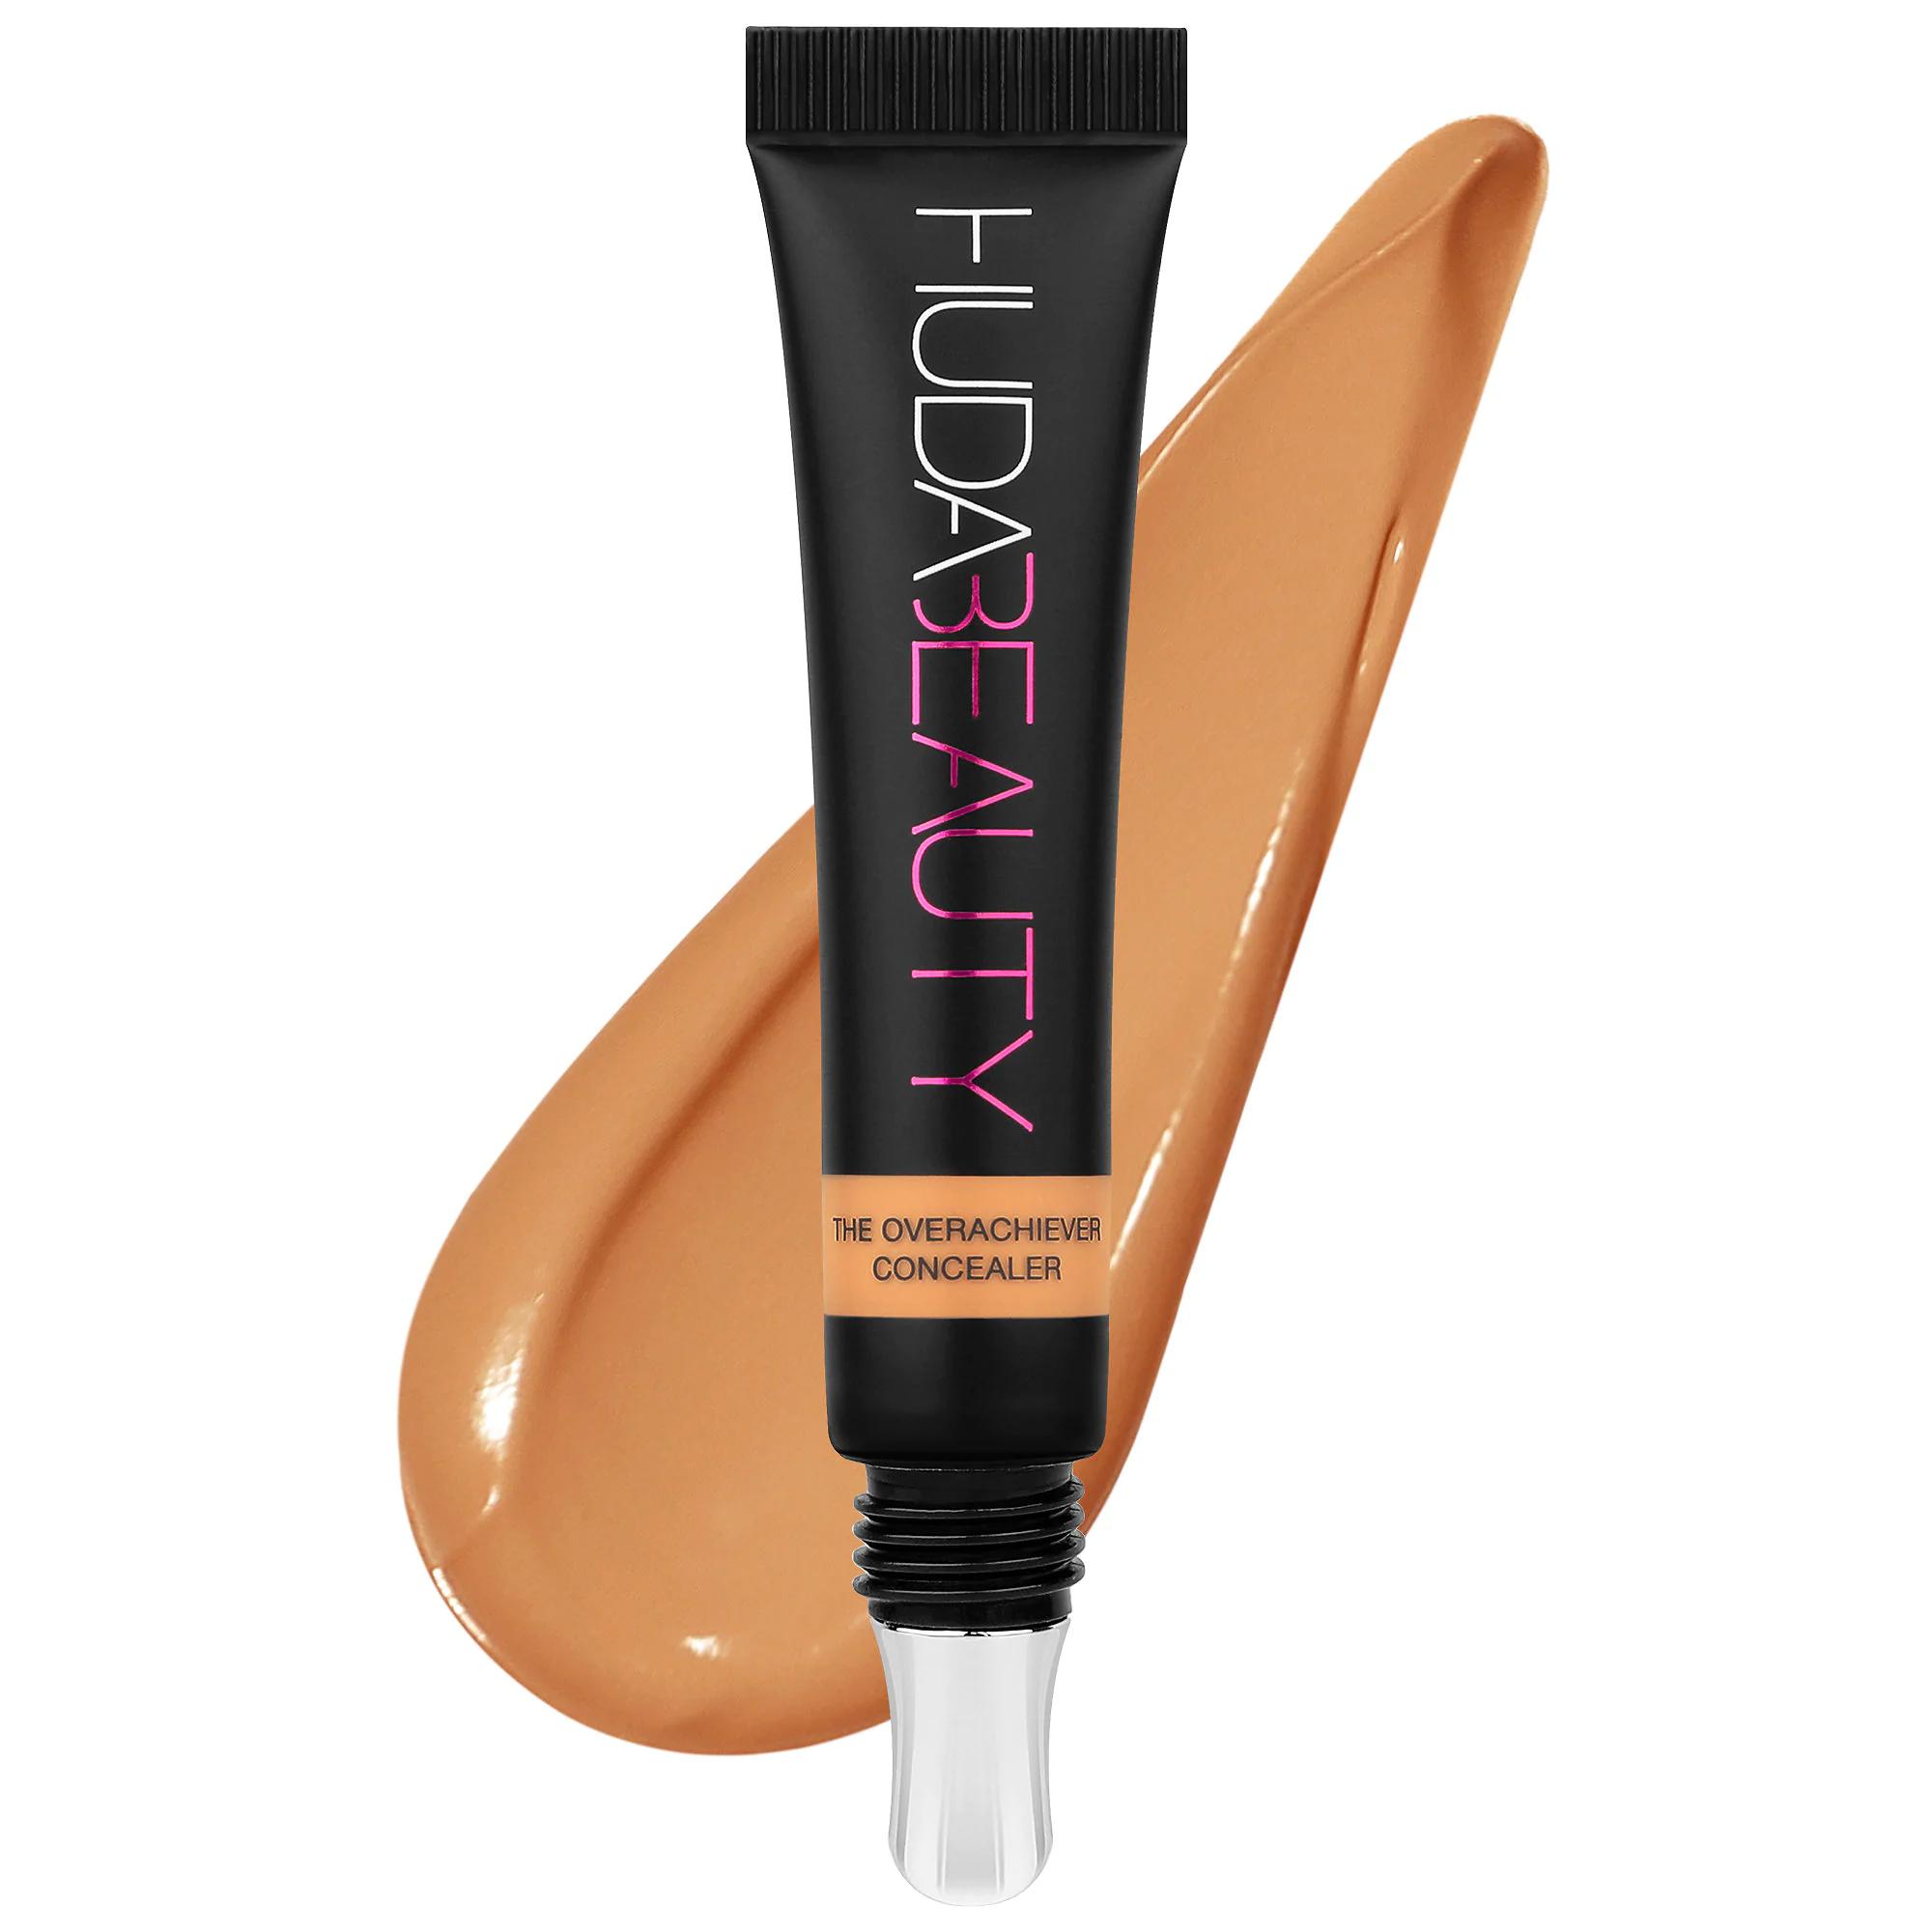 Huda Beauty The Overachiever Concealer Peanut Butter 24G